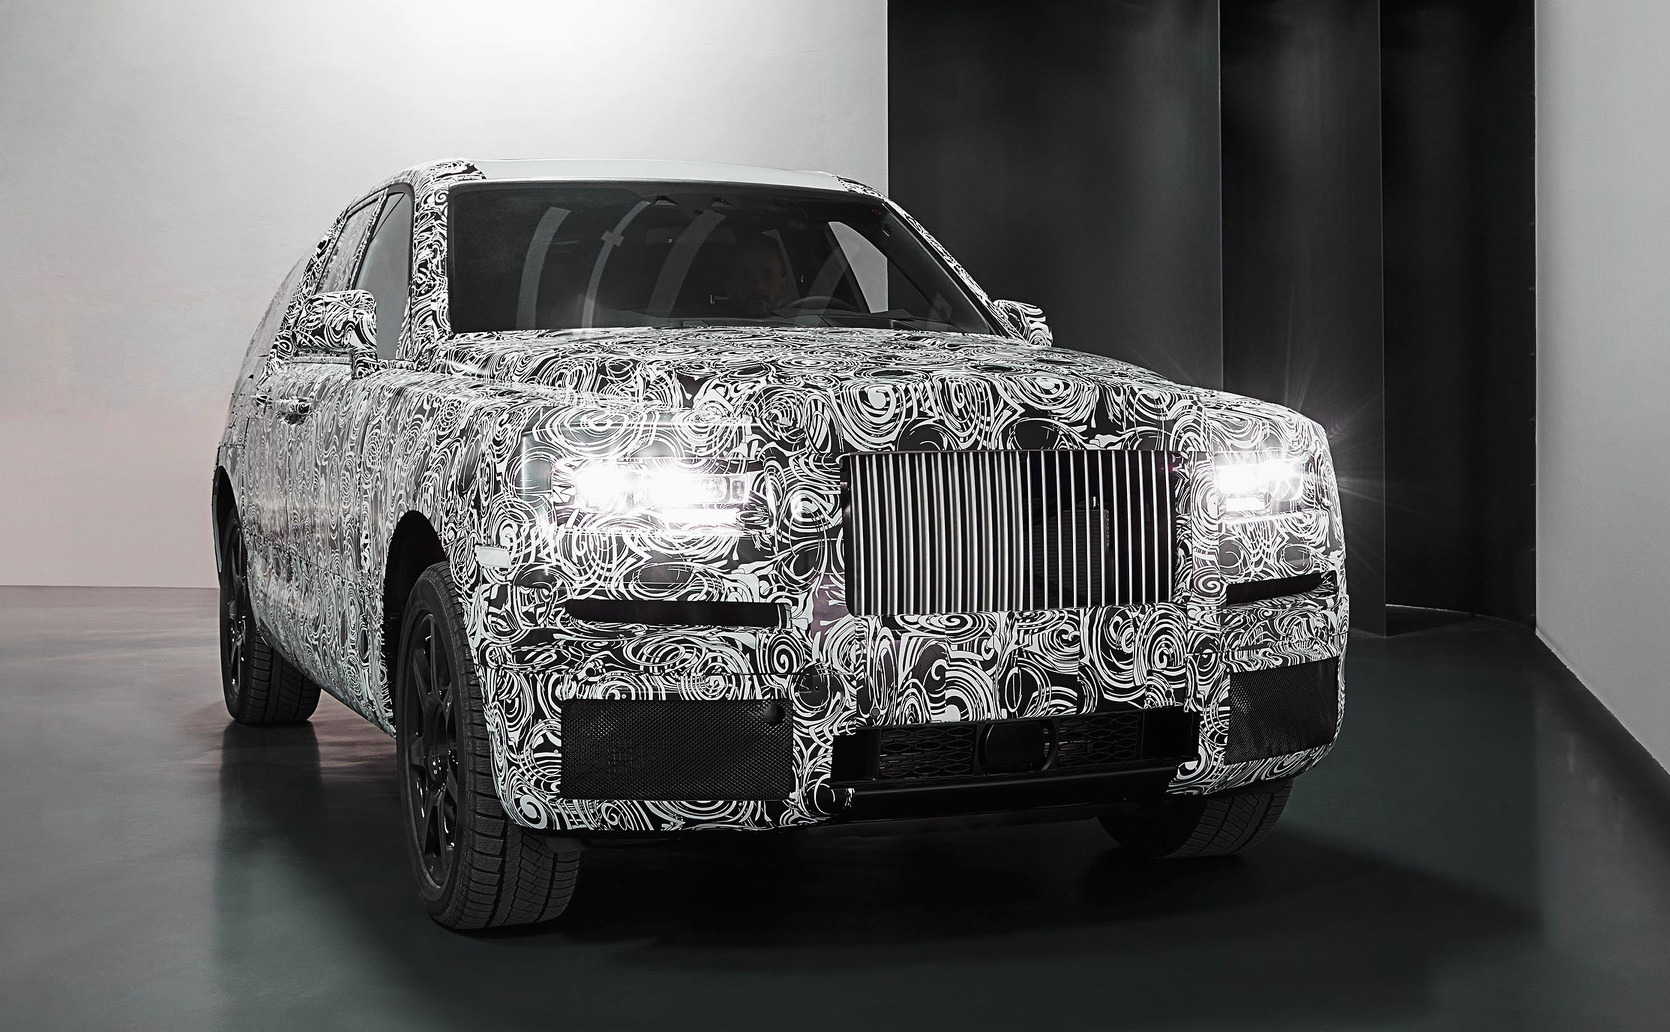 Rolls-Royce Cullinan SUV previewed with near-production body